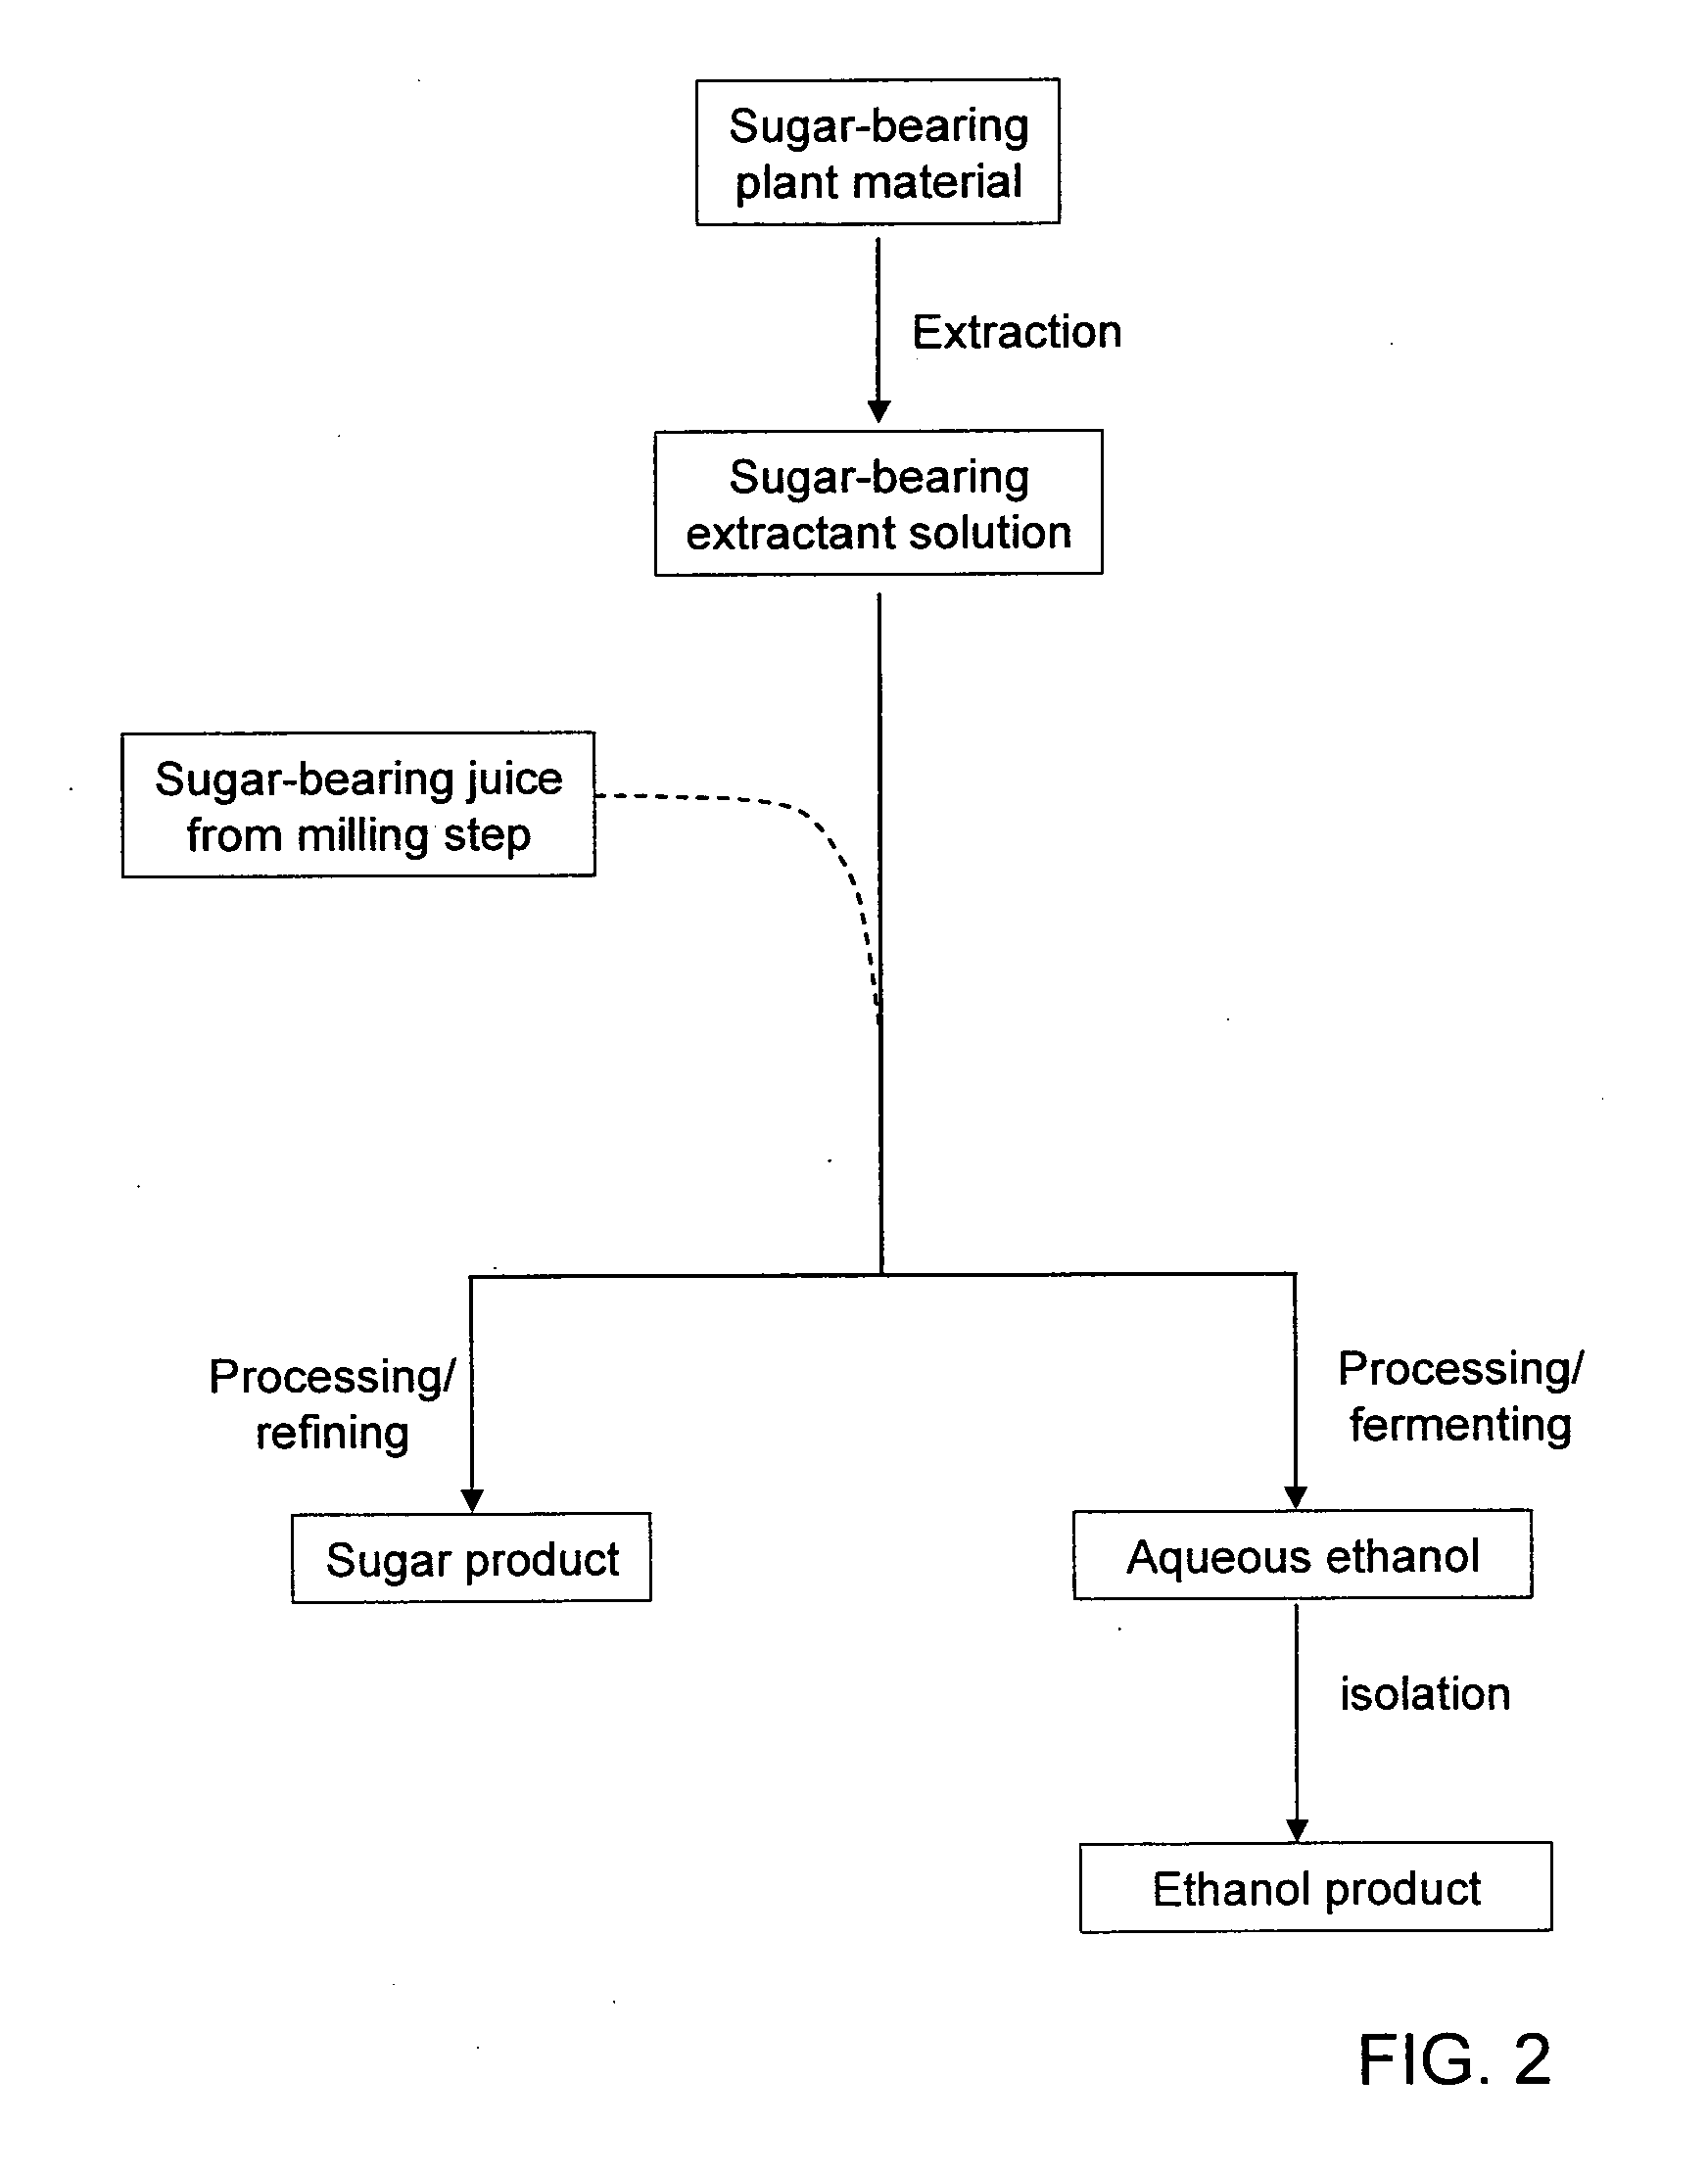 Processes for Extraction of Sugar From Sugar-Bearing Plant Material